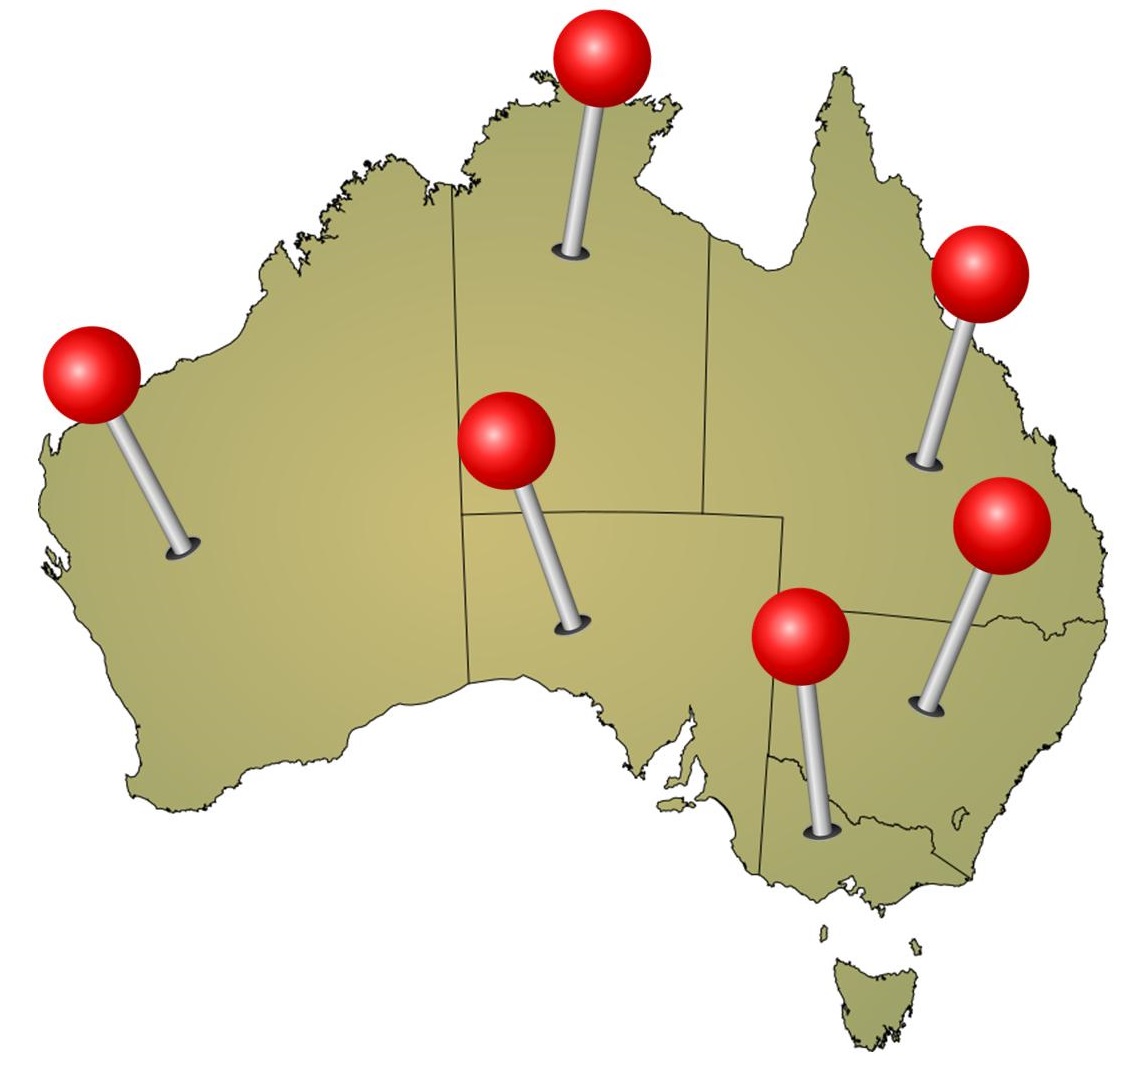 Australia geolocation location based spacial data collection